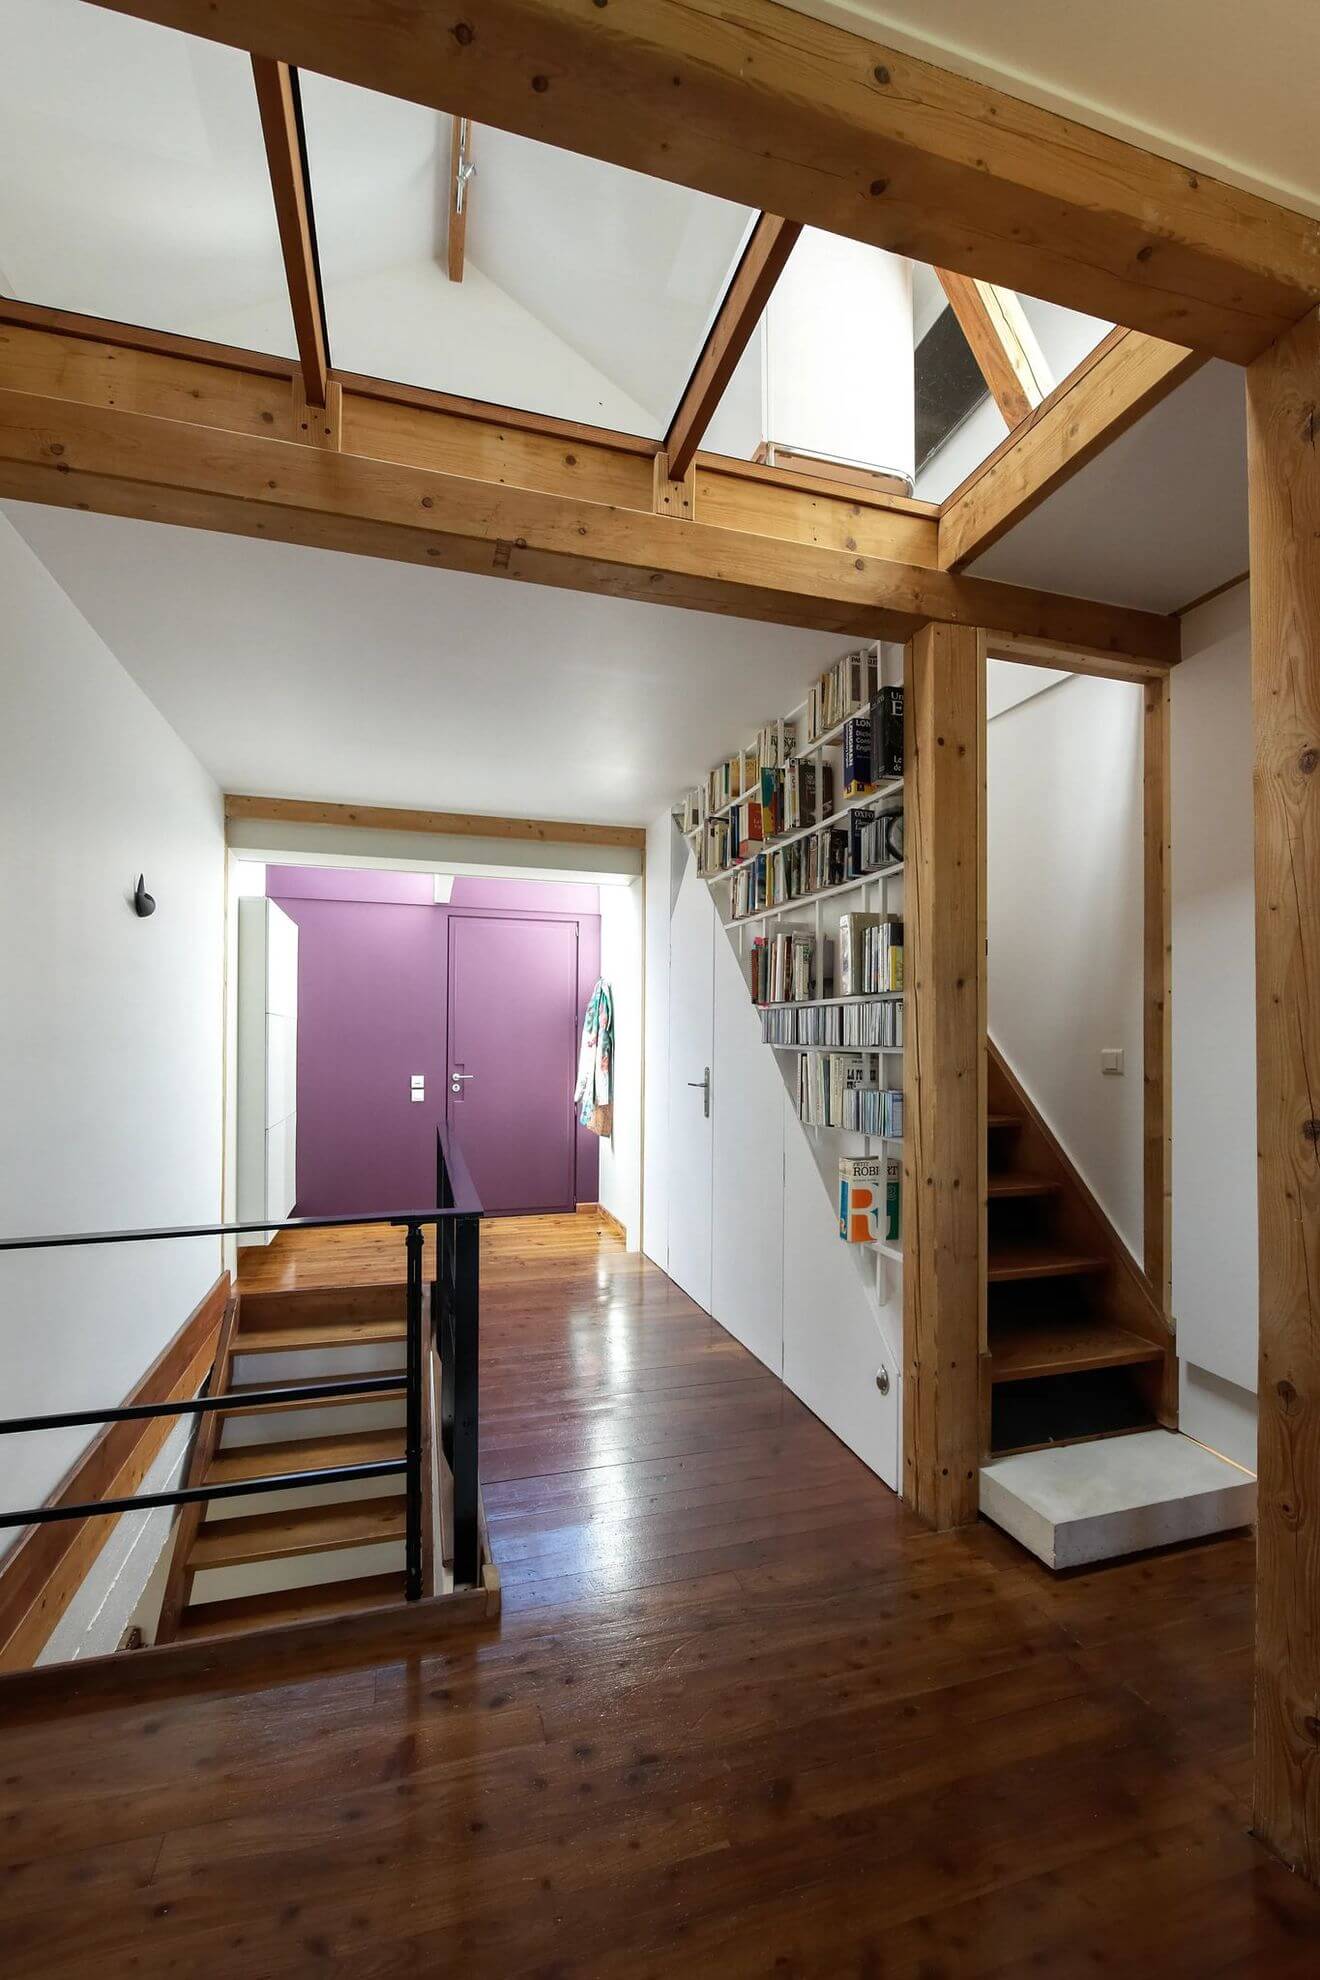 13- In the hallway, the bookcase follows the shape of the stairs